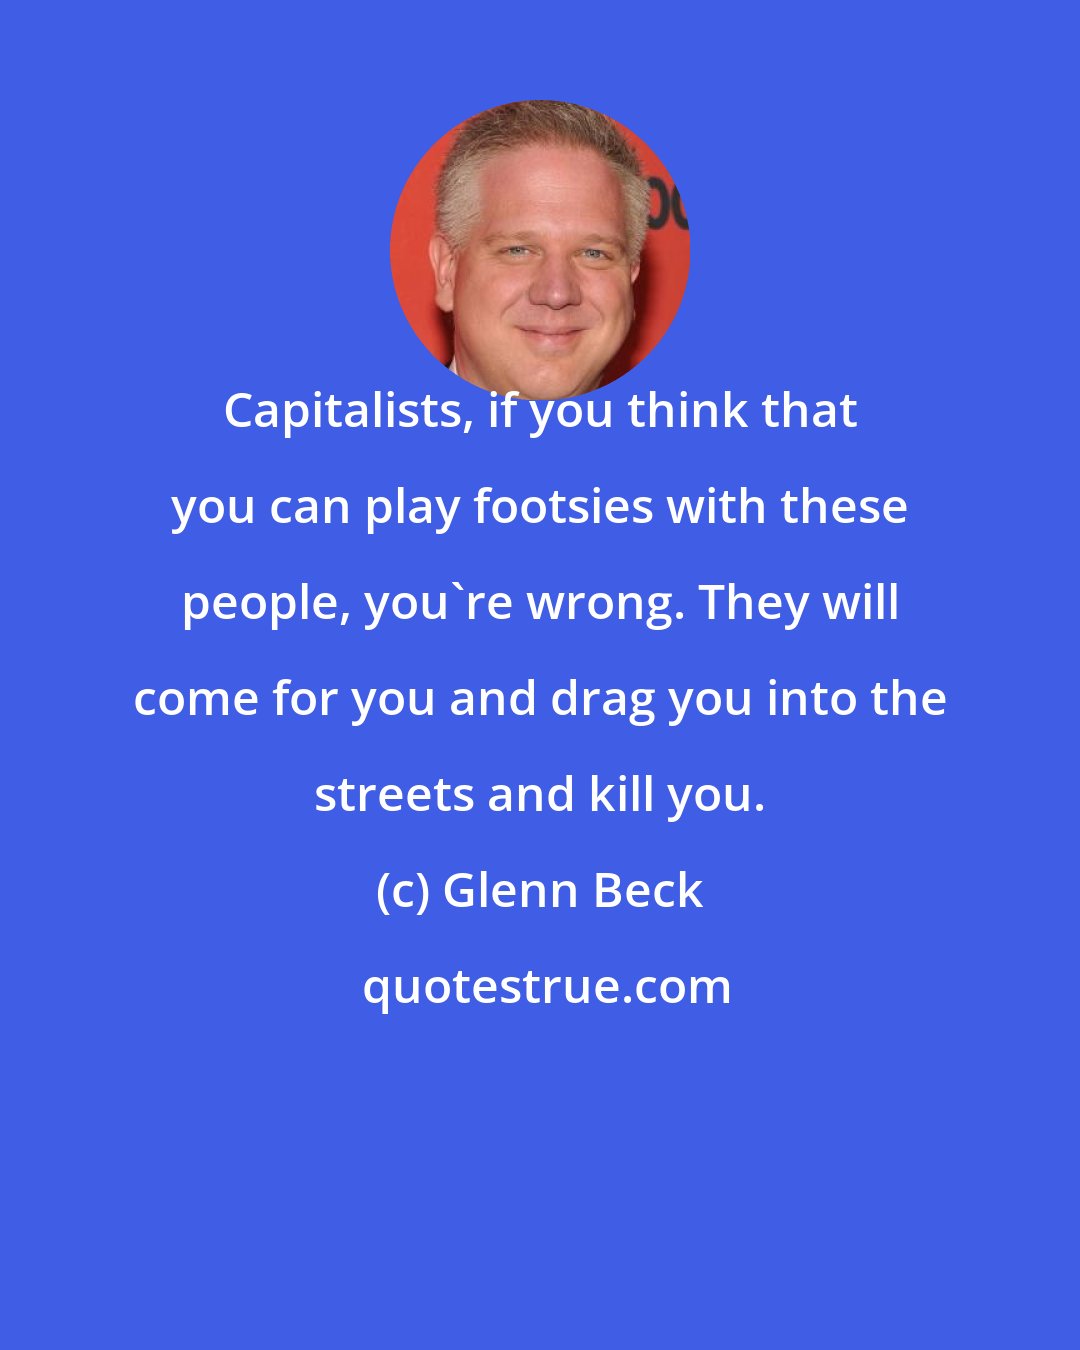 Glenn Beck: Capitalists, if you think that you can play footsies with these people, you're wrong. They will come for you and drag you into the streets and kill you.